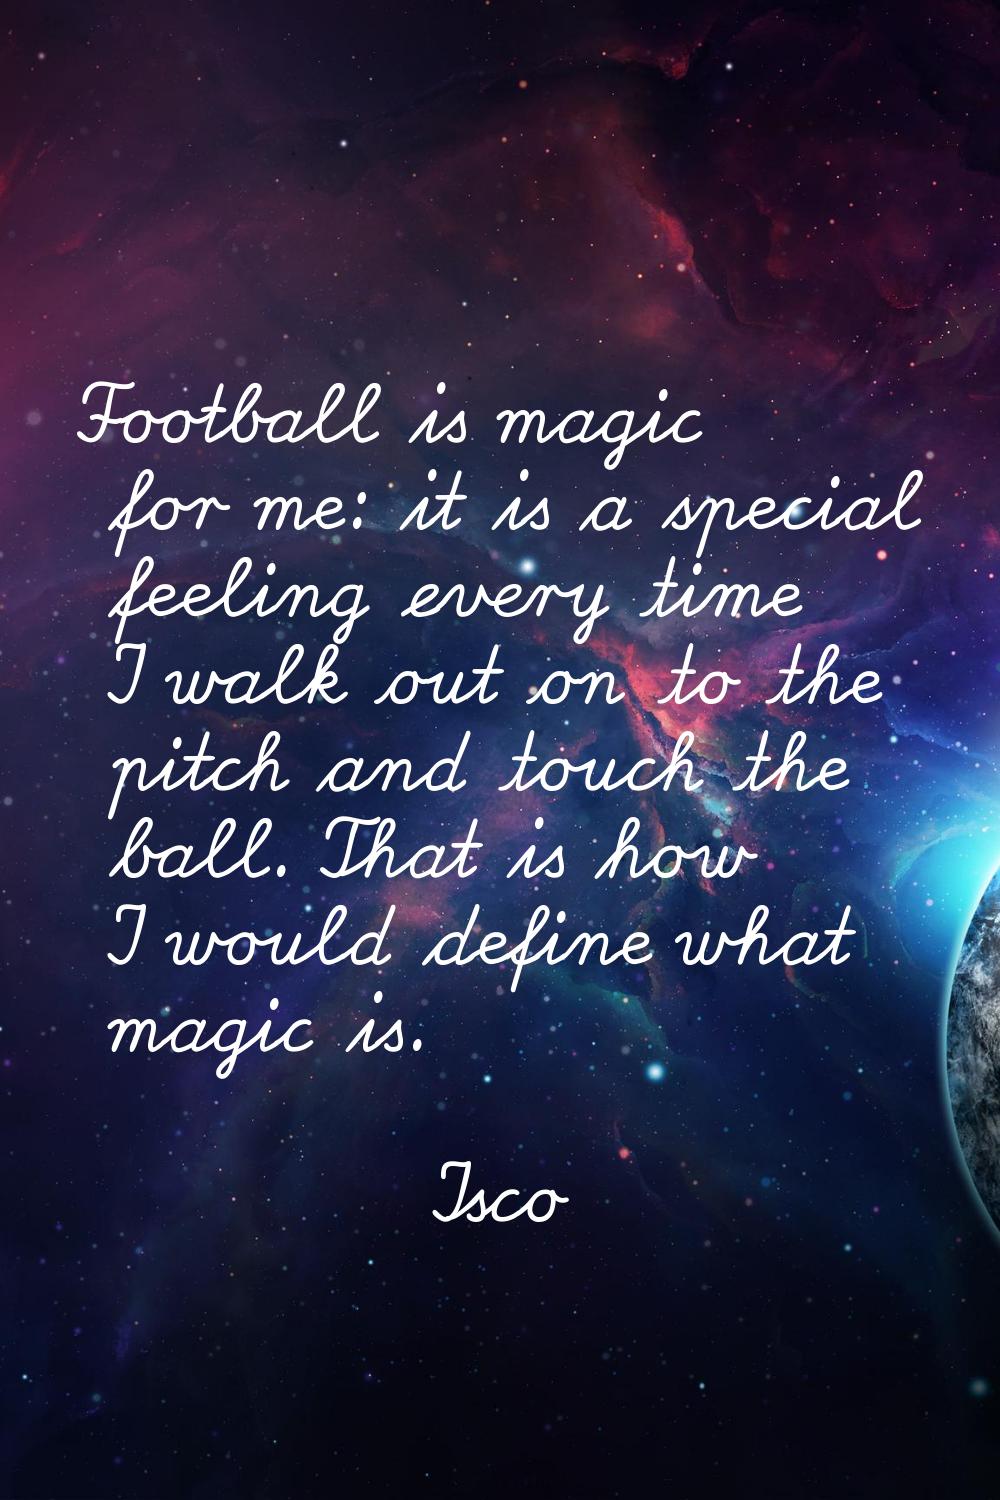 Football is magic for me: it is a special feeling every time I walk out on to the pitch and touch t